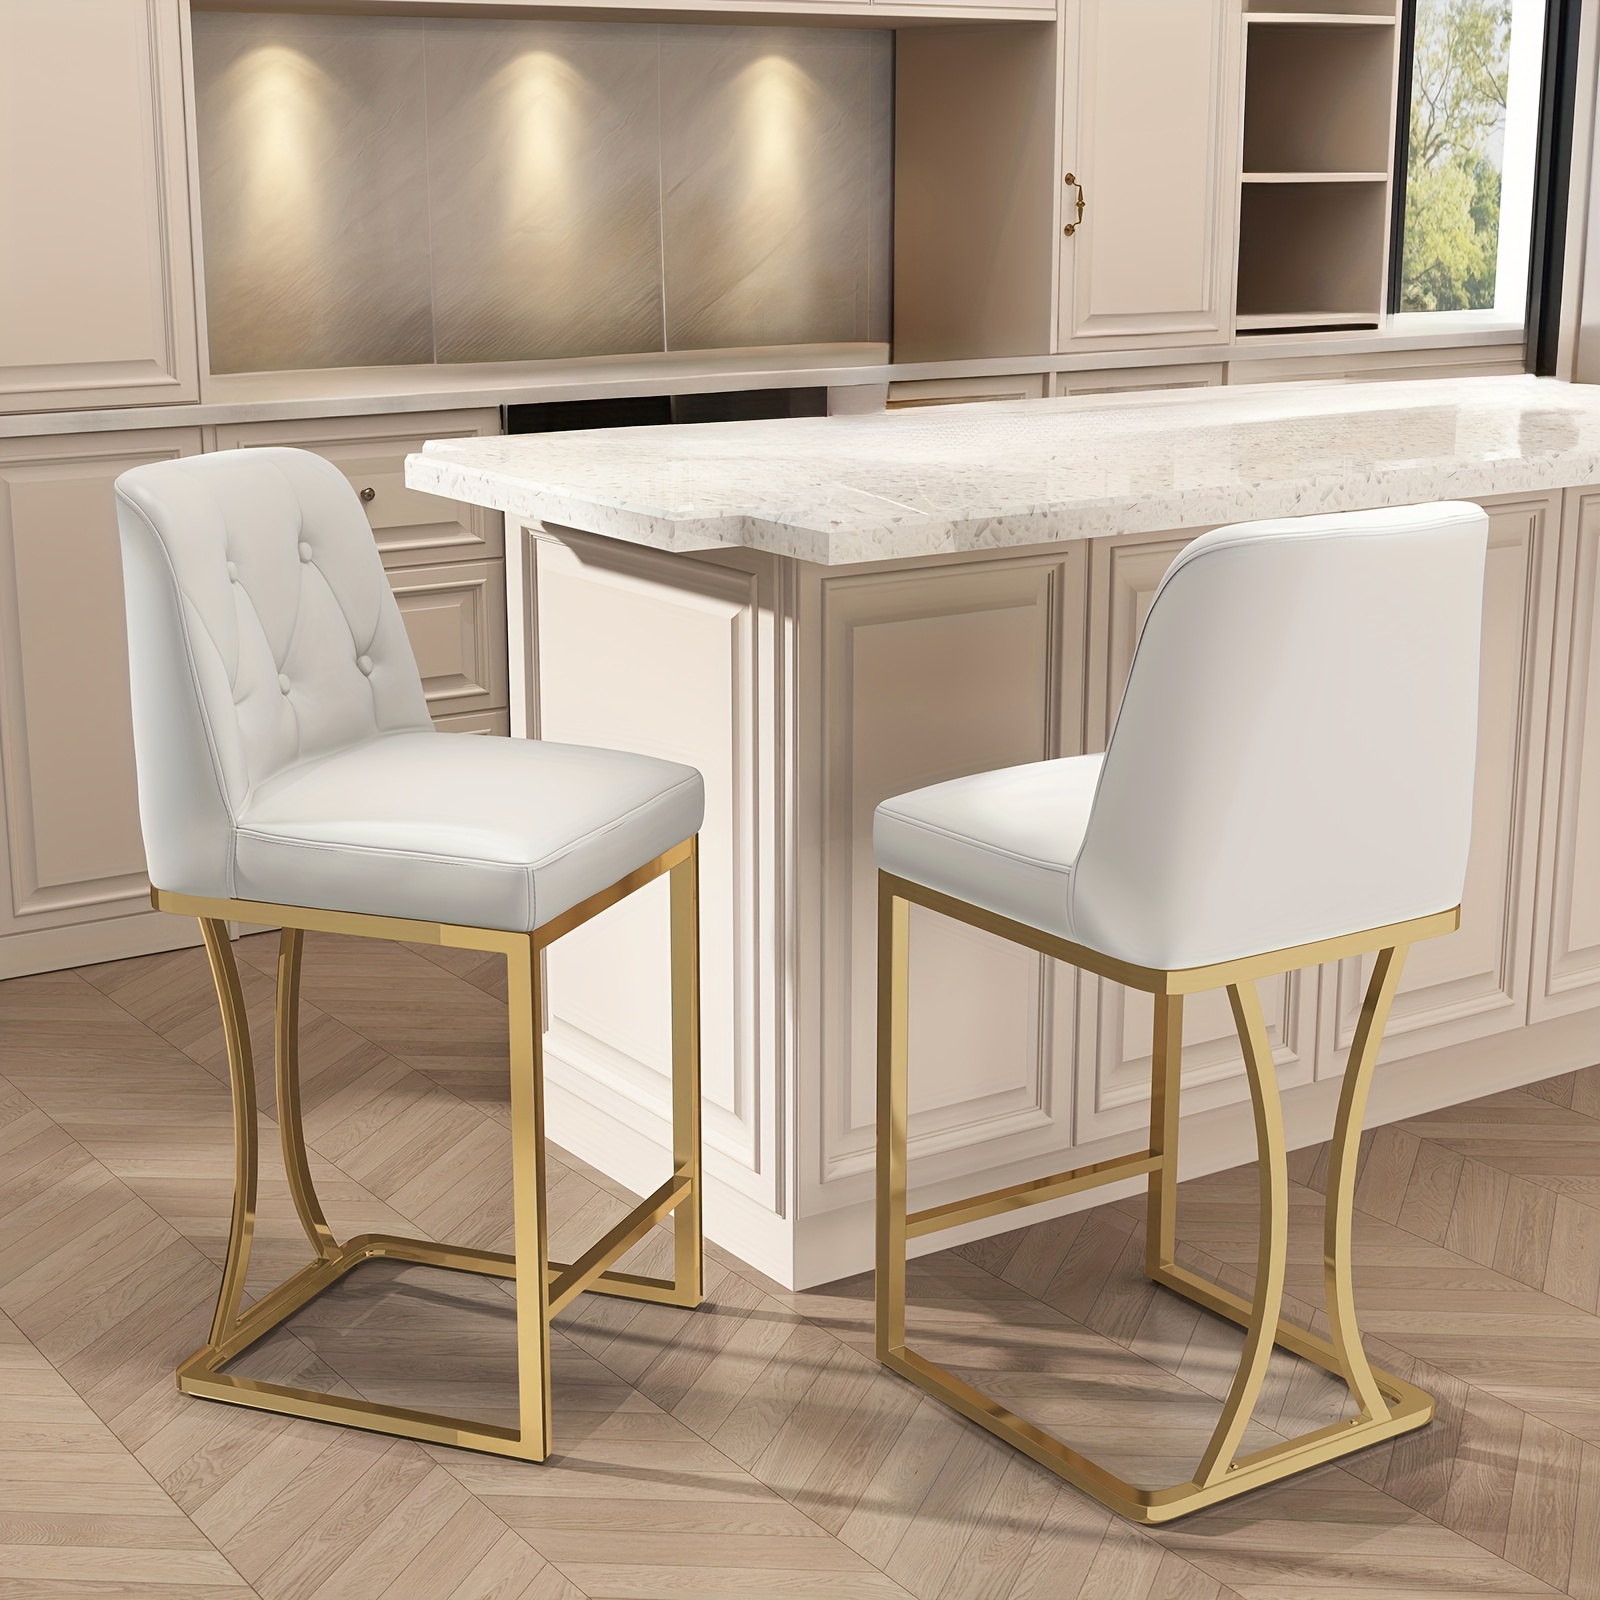 

24" Counter Height Bar Stools Set Of 2, White Bar Stools With Back And Gold Metal Frame, Modern Luxury Barstools With Footrest, Upholstered Pu Leather Counter Stools For Kitchen Island